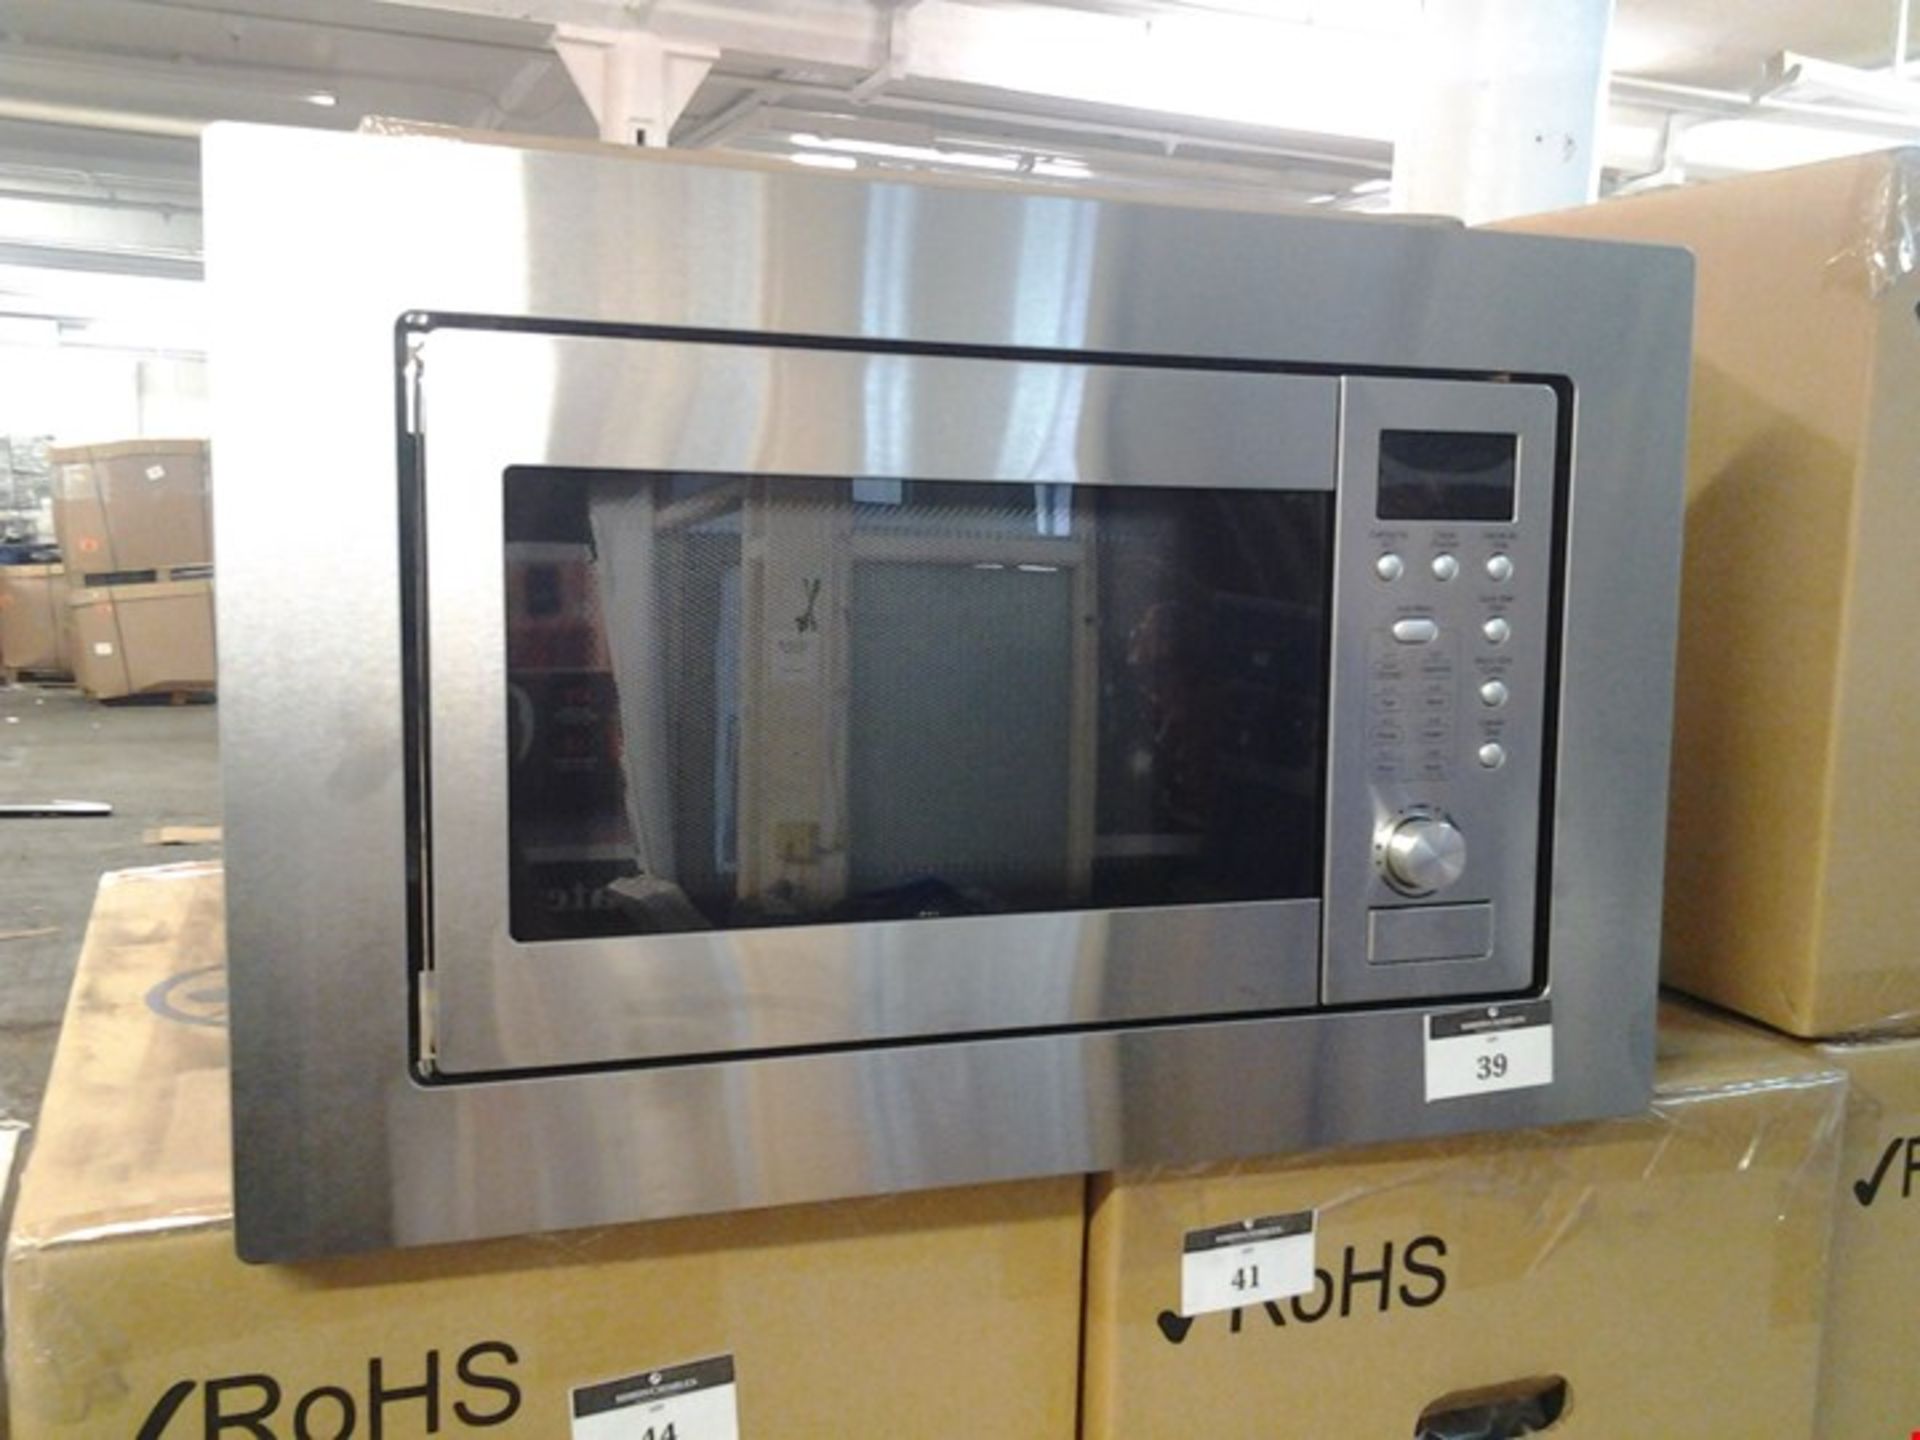 BOXED 20L BUILT IN MICROWAVE RRP Â£80.00